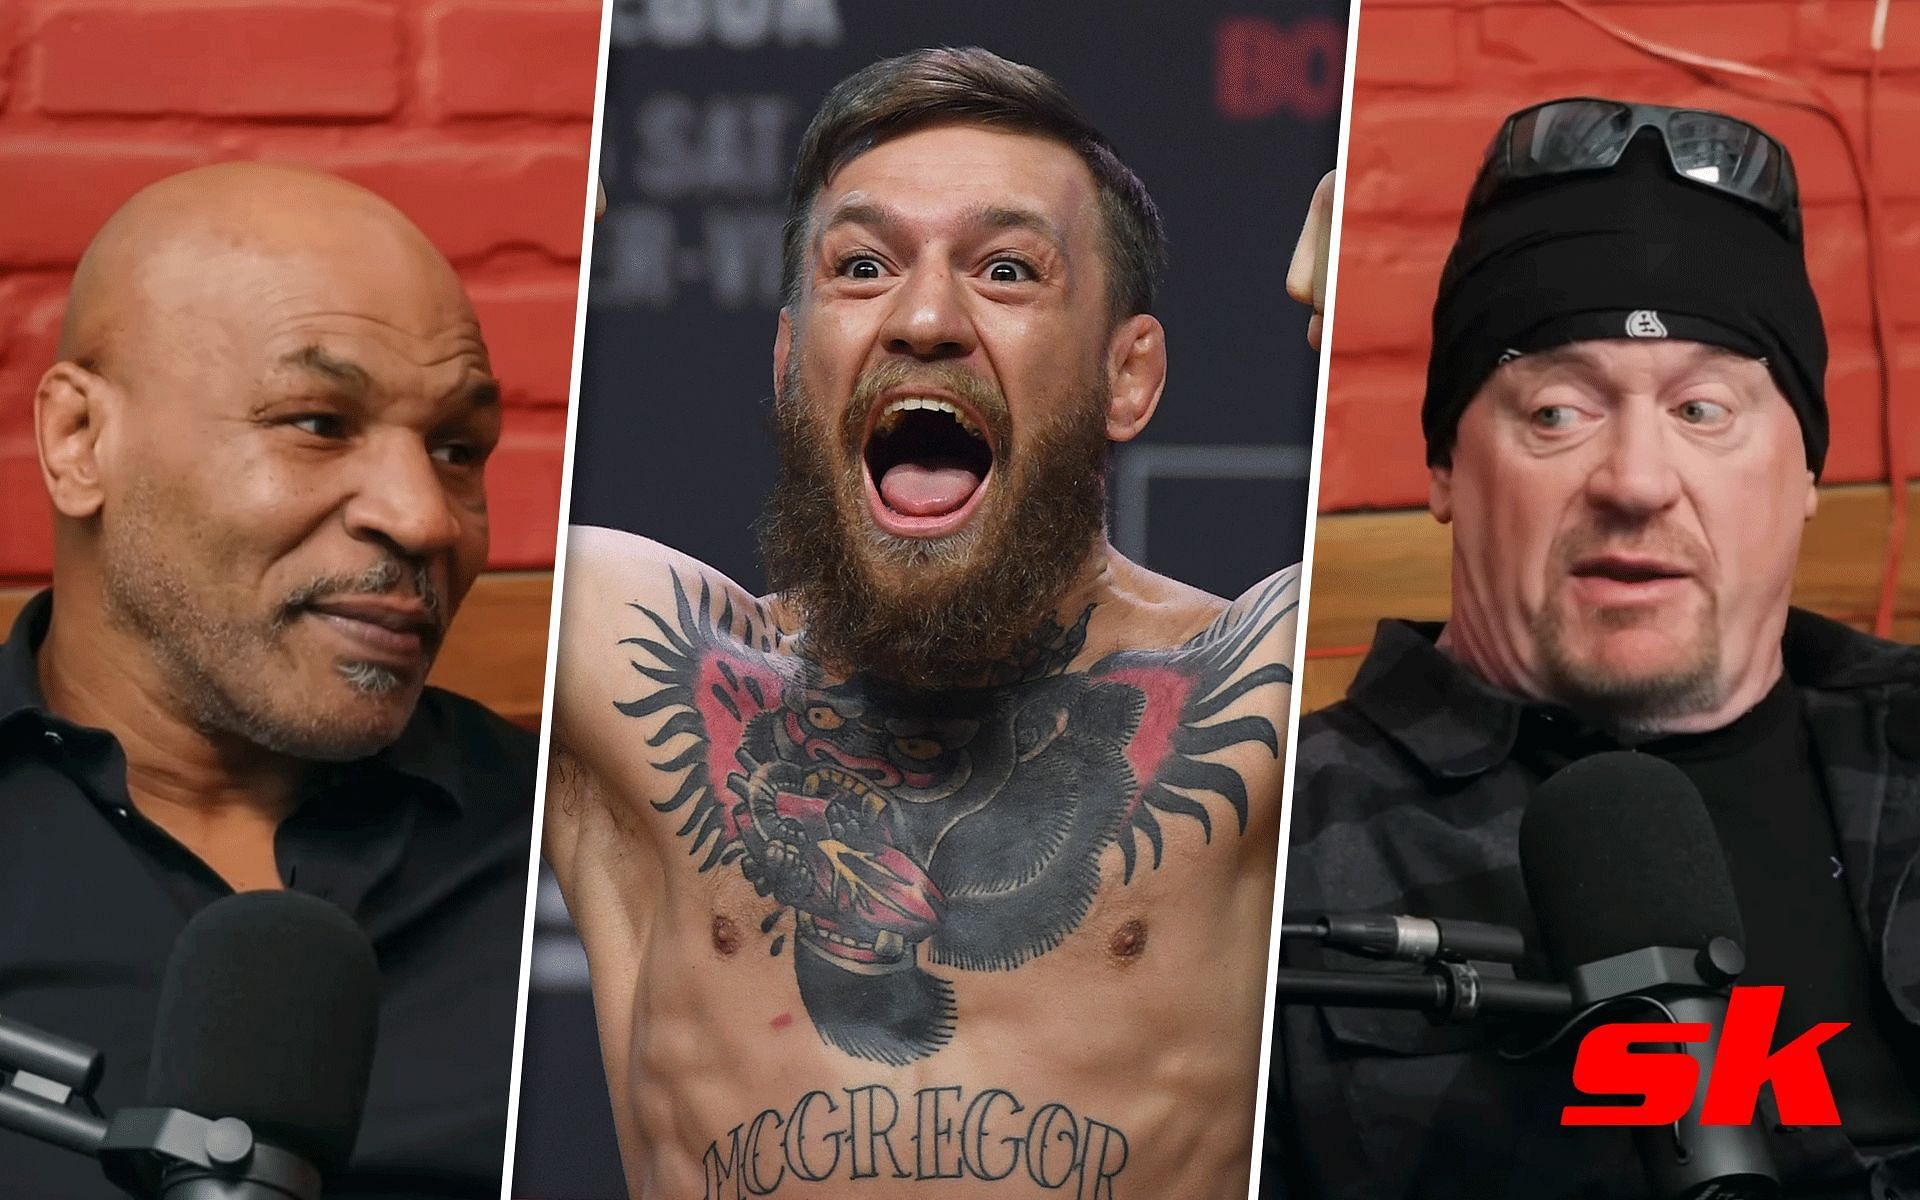 Left to Right: Mike Tyson, Conor McGregor and The Undertaker [Images via: Hotboxin